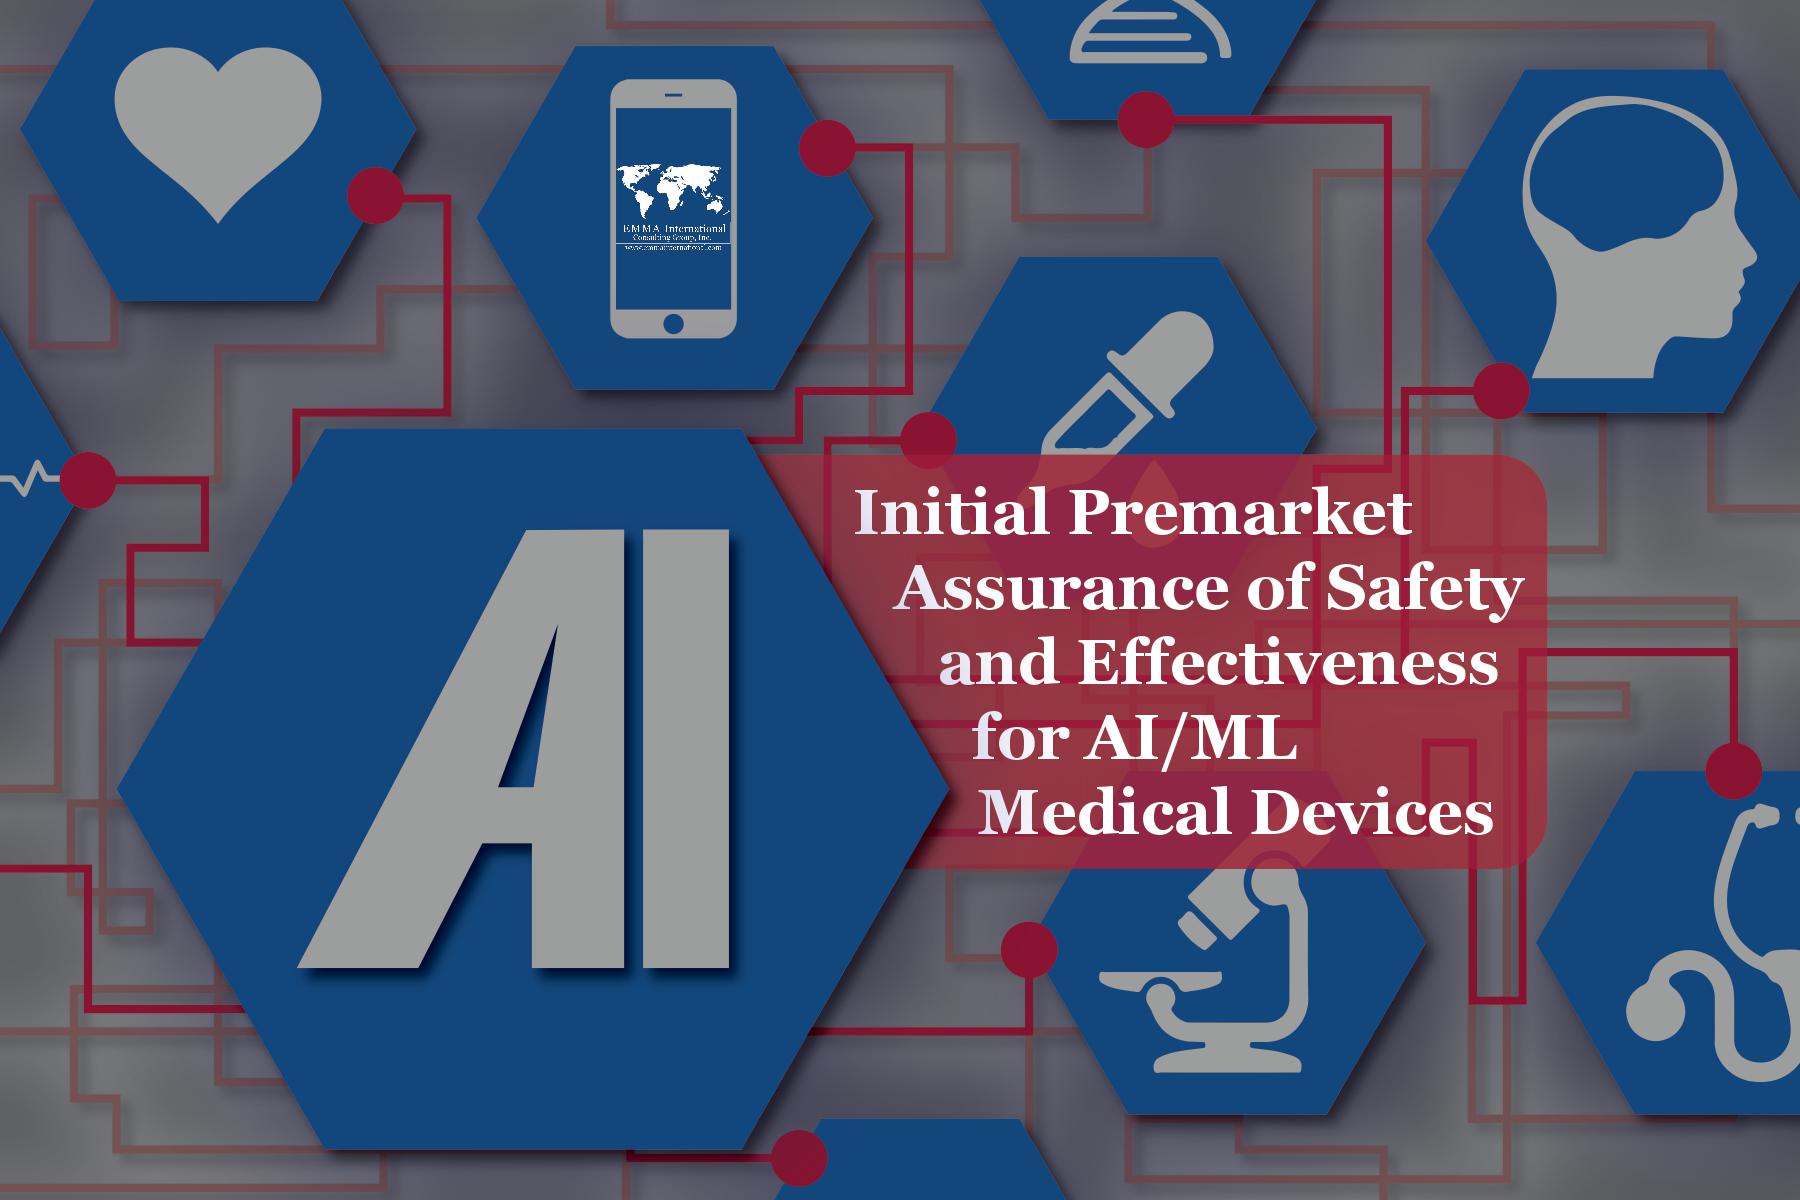 Initial Premarket Assurance of Safety and Effectiveness for AI/ML Medical Devices